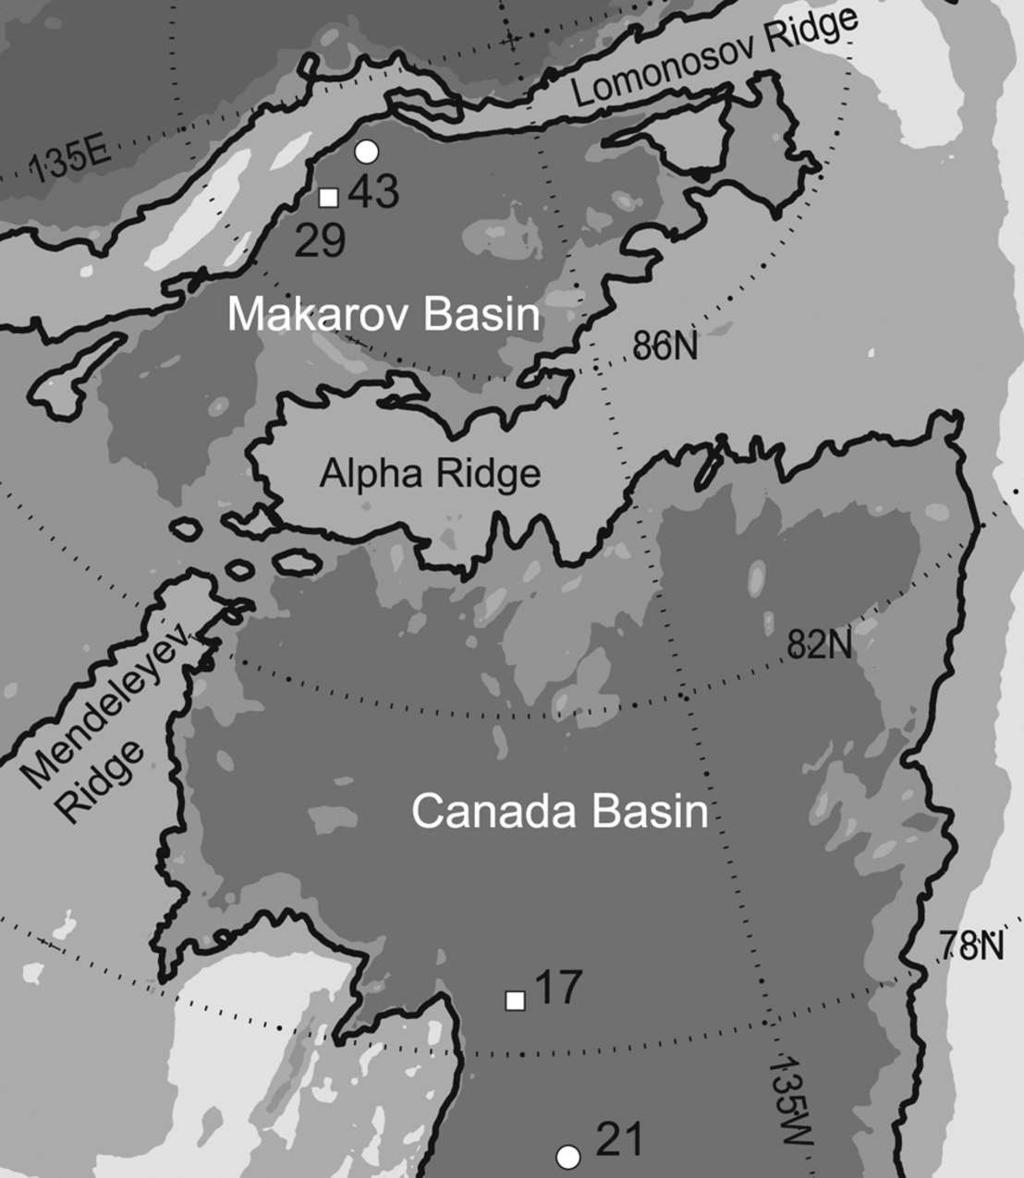 872 J O U R N A L O F P H Y S I C A L O C E A N O G R A P H Y VOLUME 36 FIG. 6. Map of the Makarov and Canada Basins. The Alpha and Mendeleyev Ridges separate the two basins.